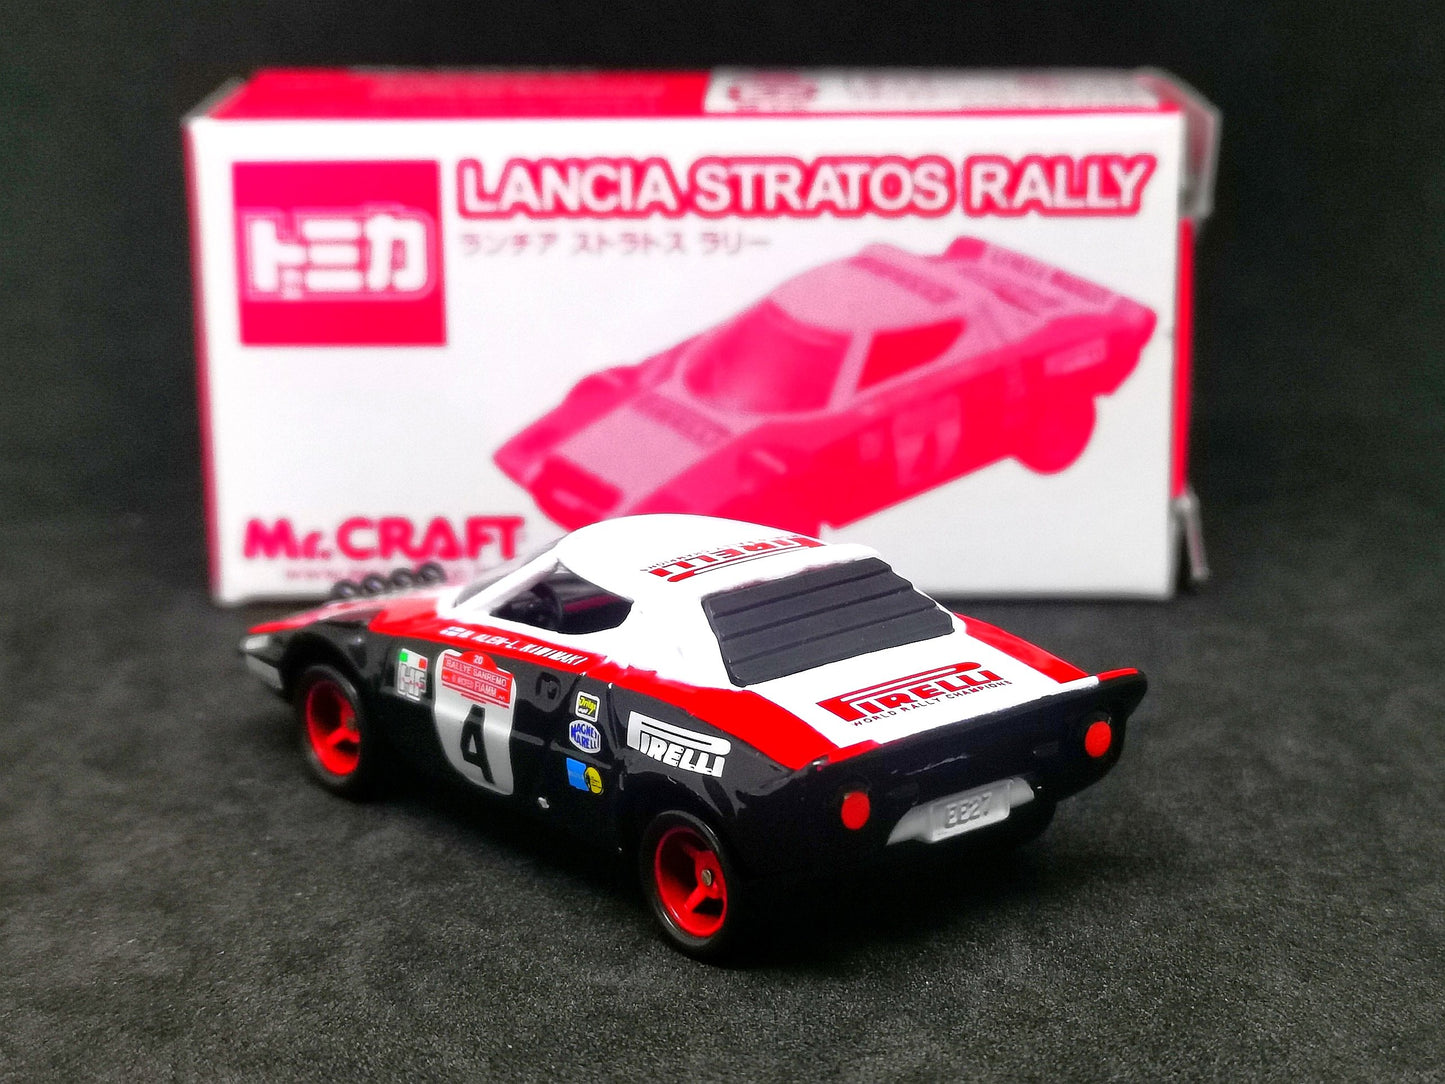 Tomica Mr.Craft Exclusive Lancia Stratos Rally